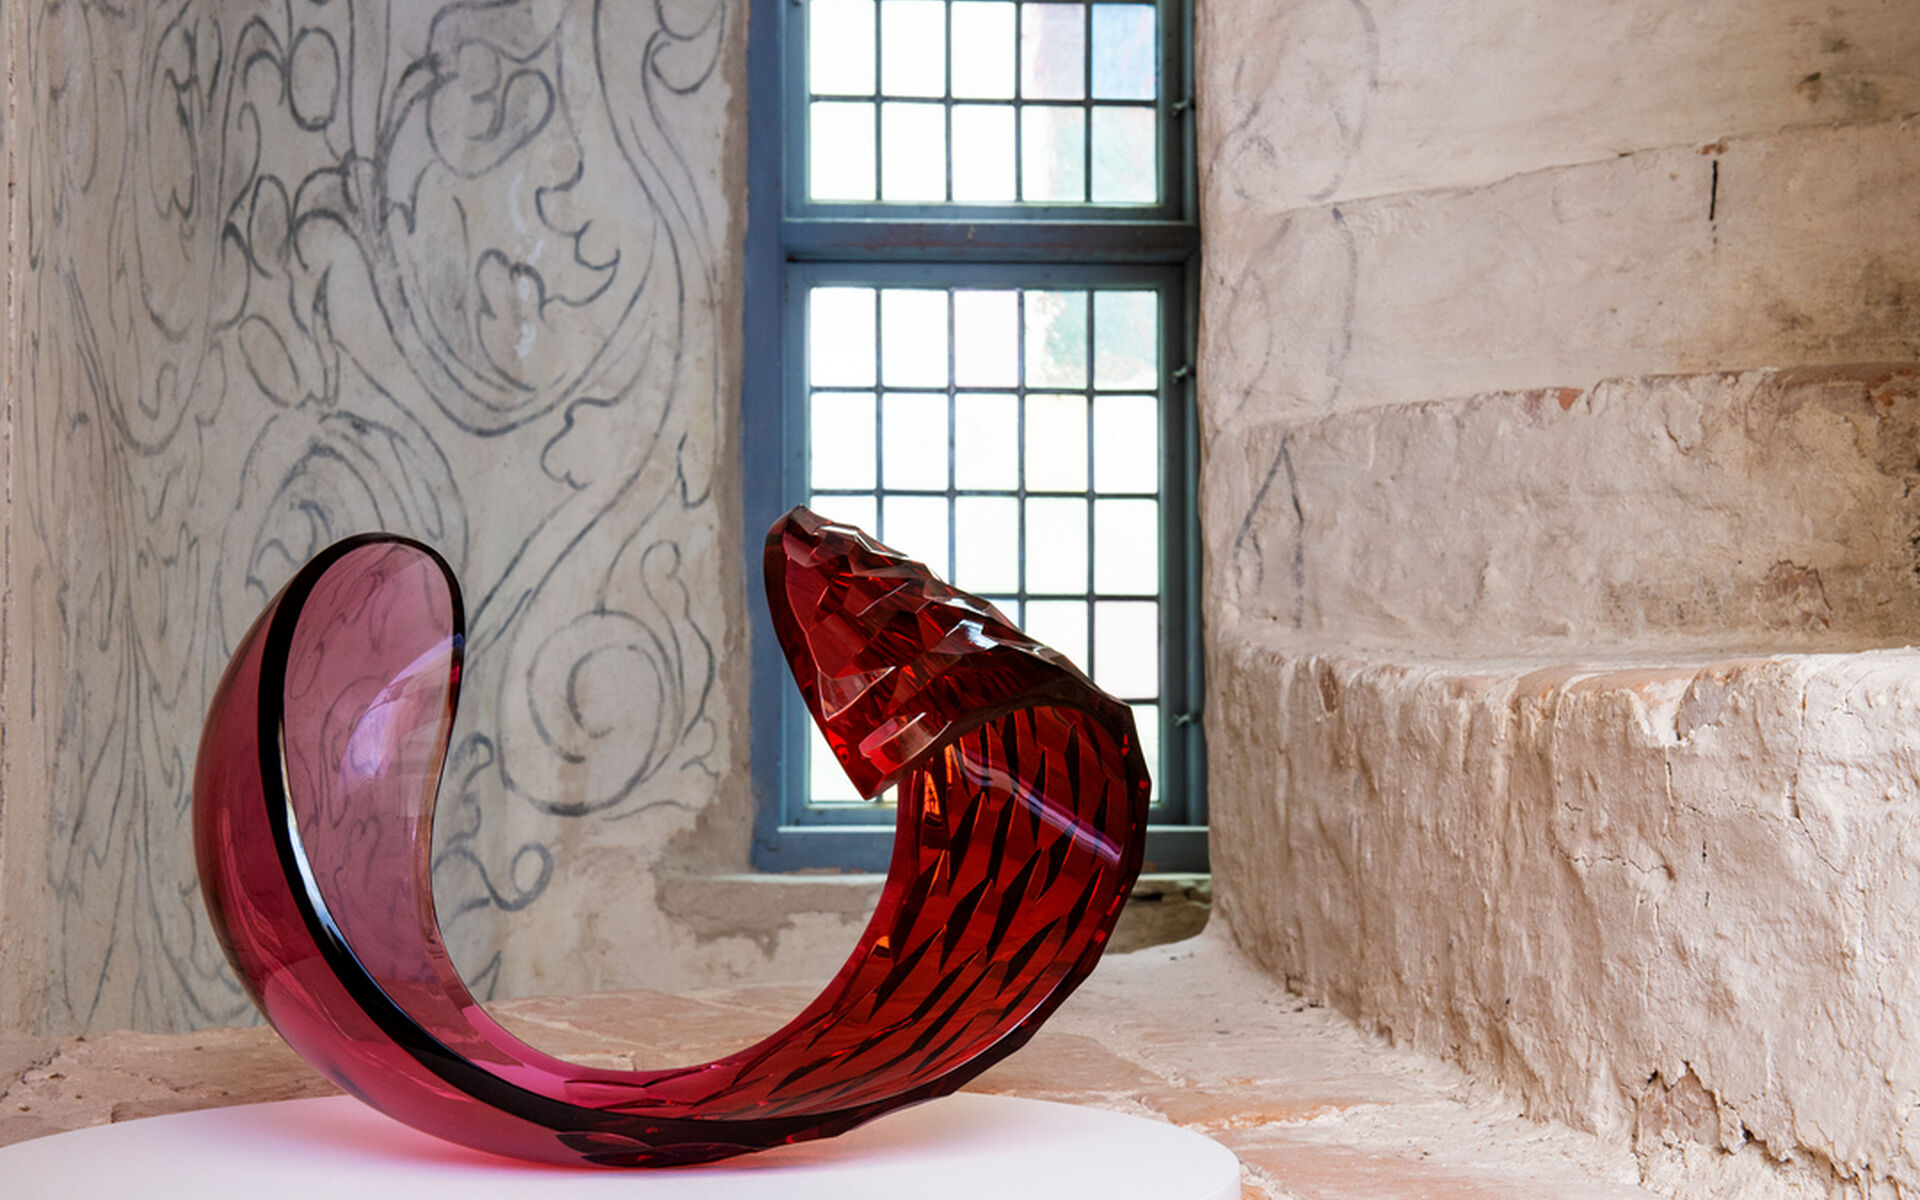 Lena Bergström, sculpture "Planets: Red Rose”. On dispaly in the exhibition "Expressions in glass" at Läckö Castle, summer 2019.